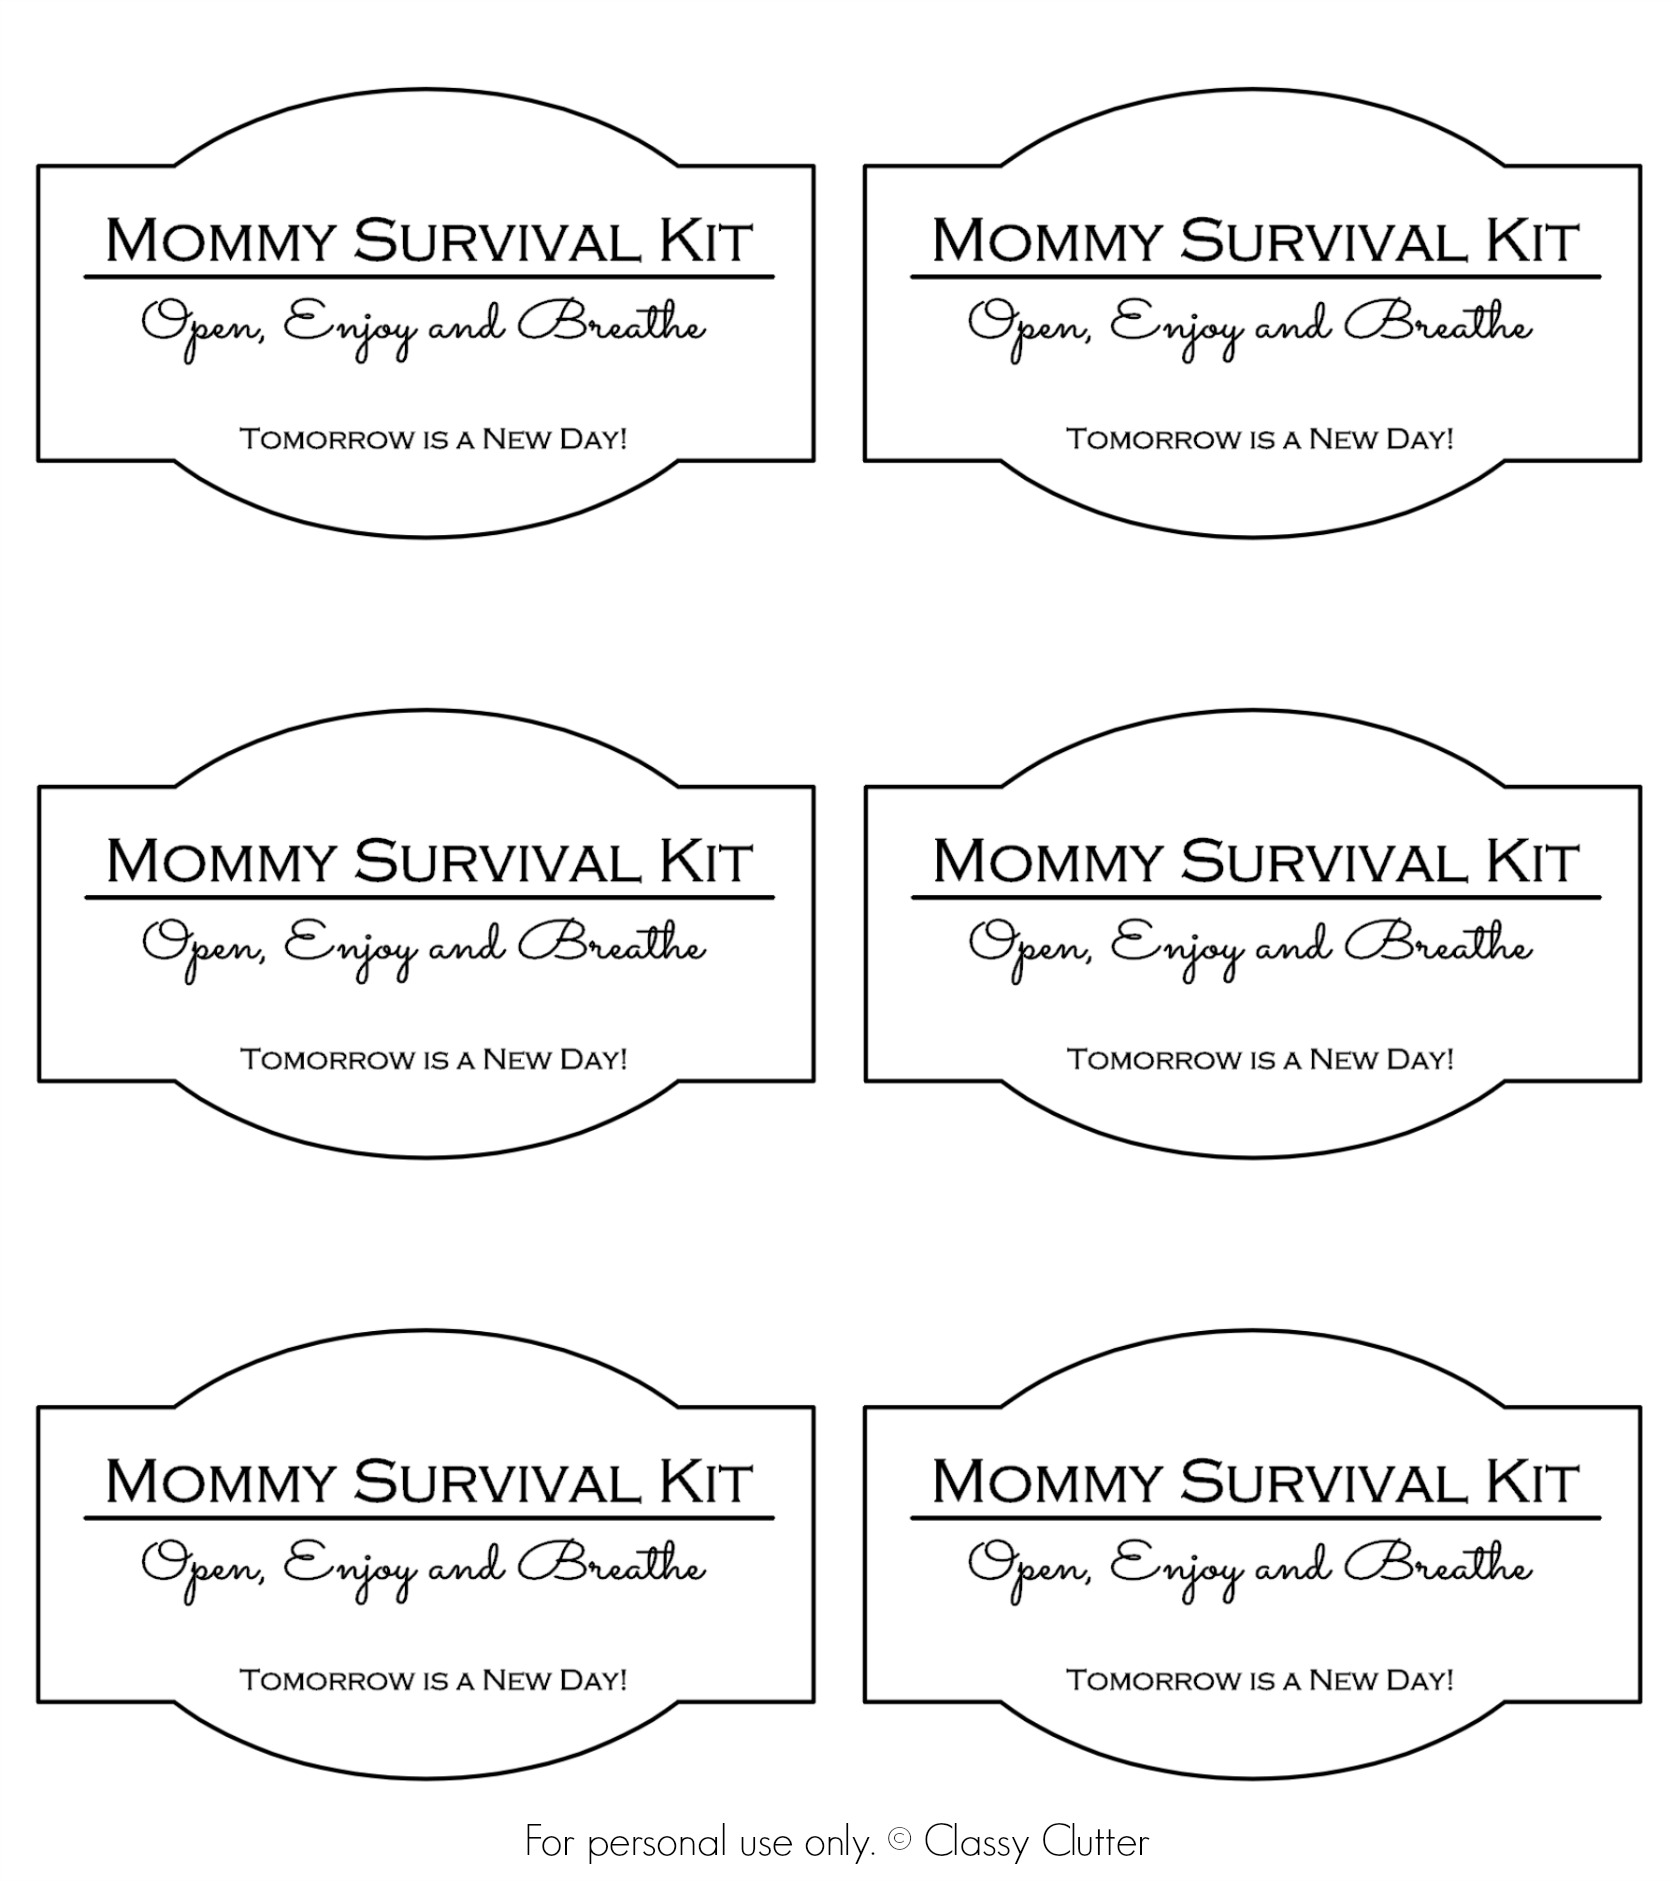 Winter Power Outage Survival Kit - Mom. Wife. Busy Life.  Emergency  survival kit, Home emergency kit, Survival kit